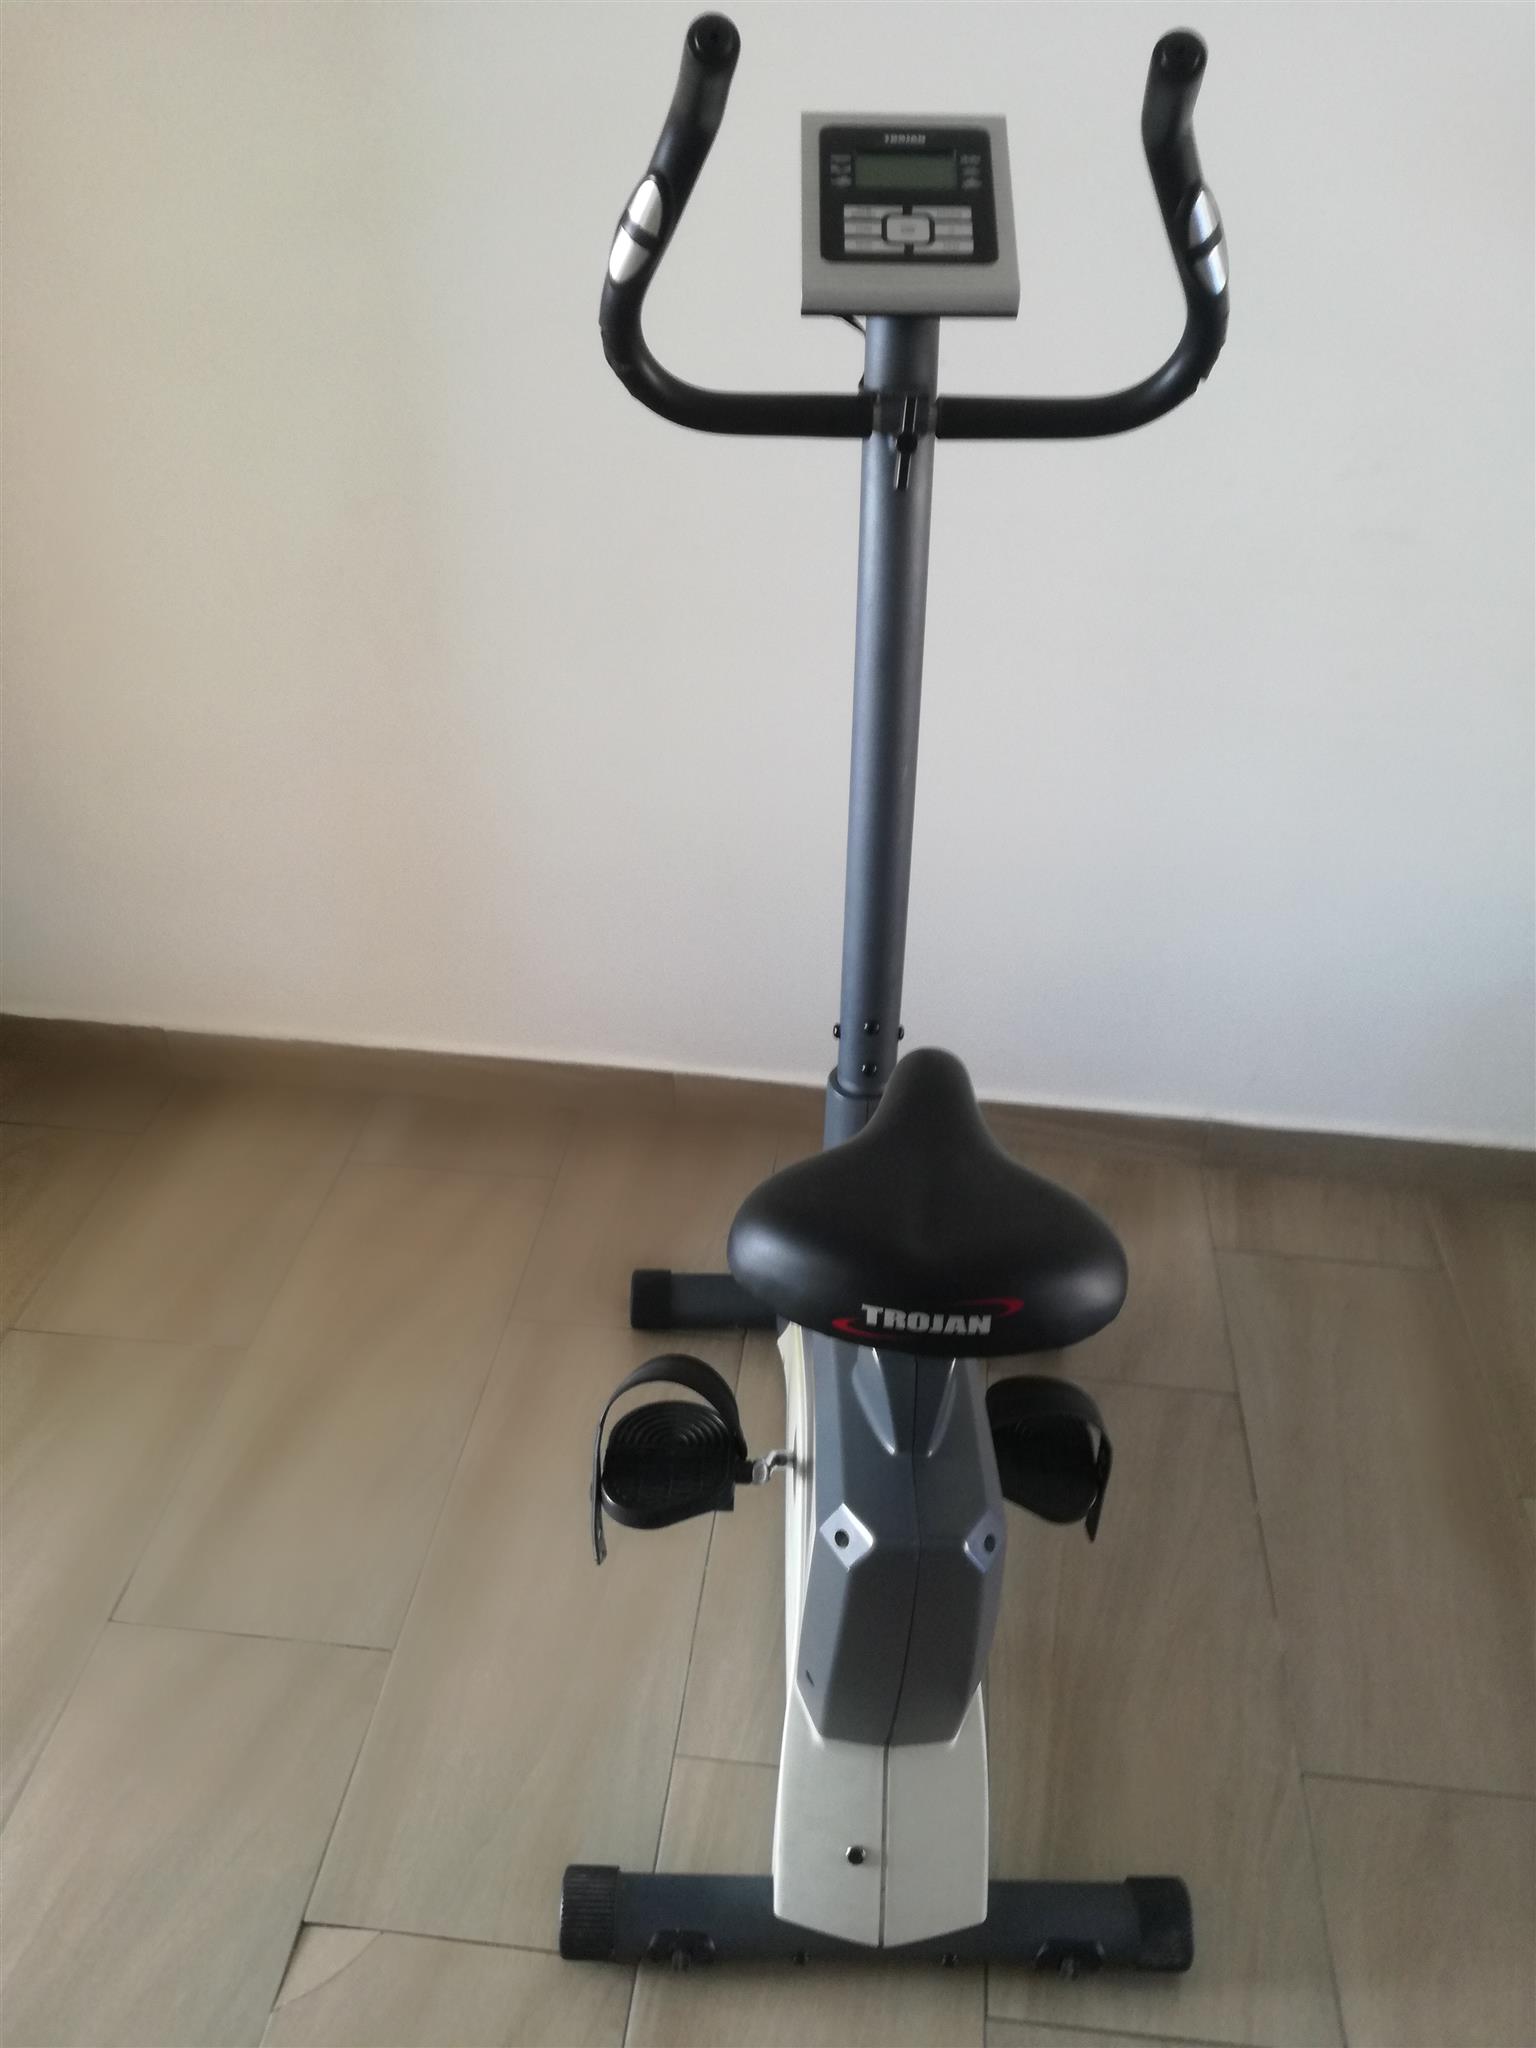 Pace 350 exercise Bike